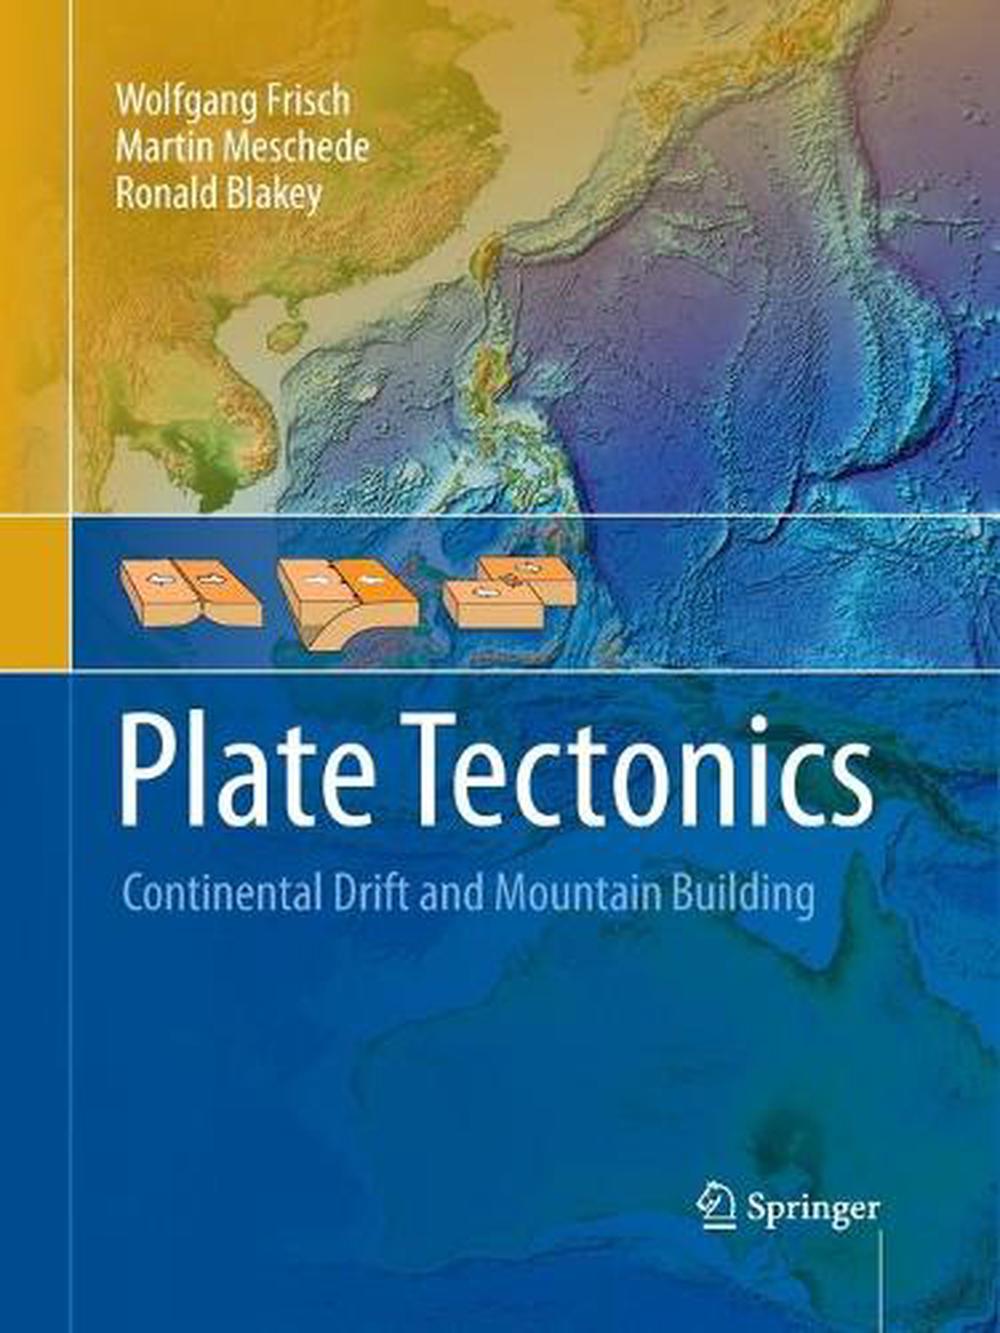 Plate Tectonics Continental Drift and Mountain Building by Wolfgang Frisch Pape 9783662501511